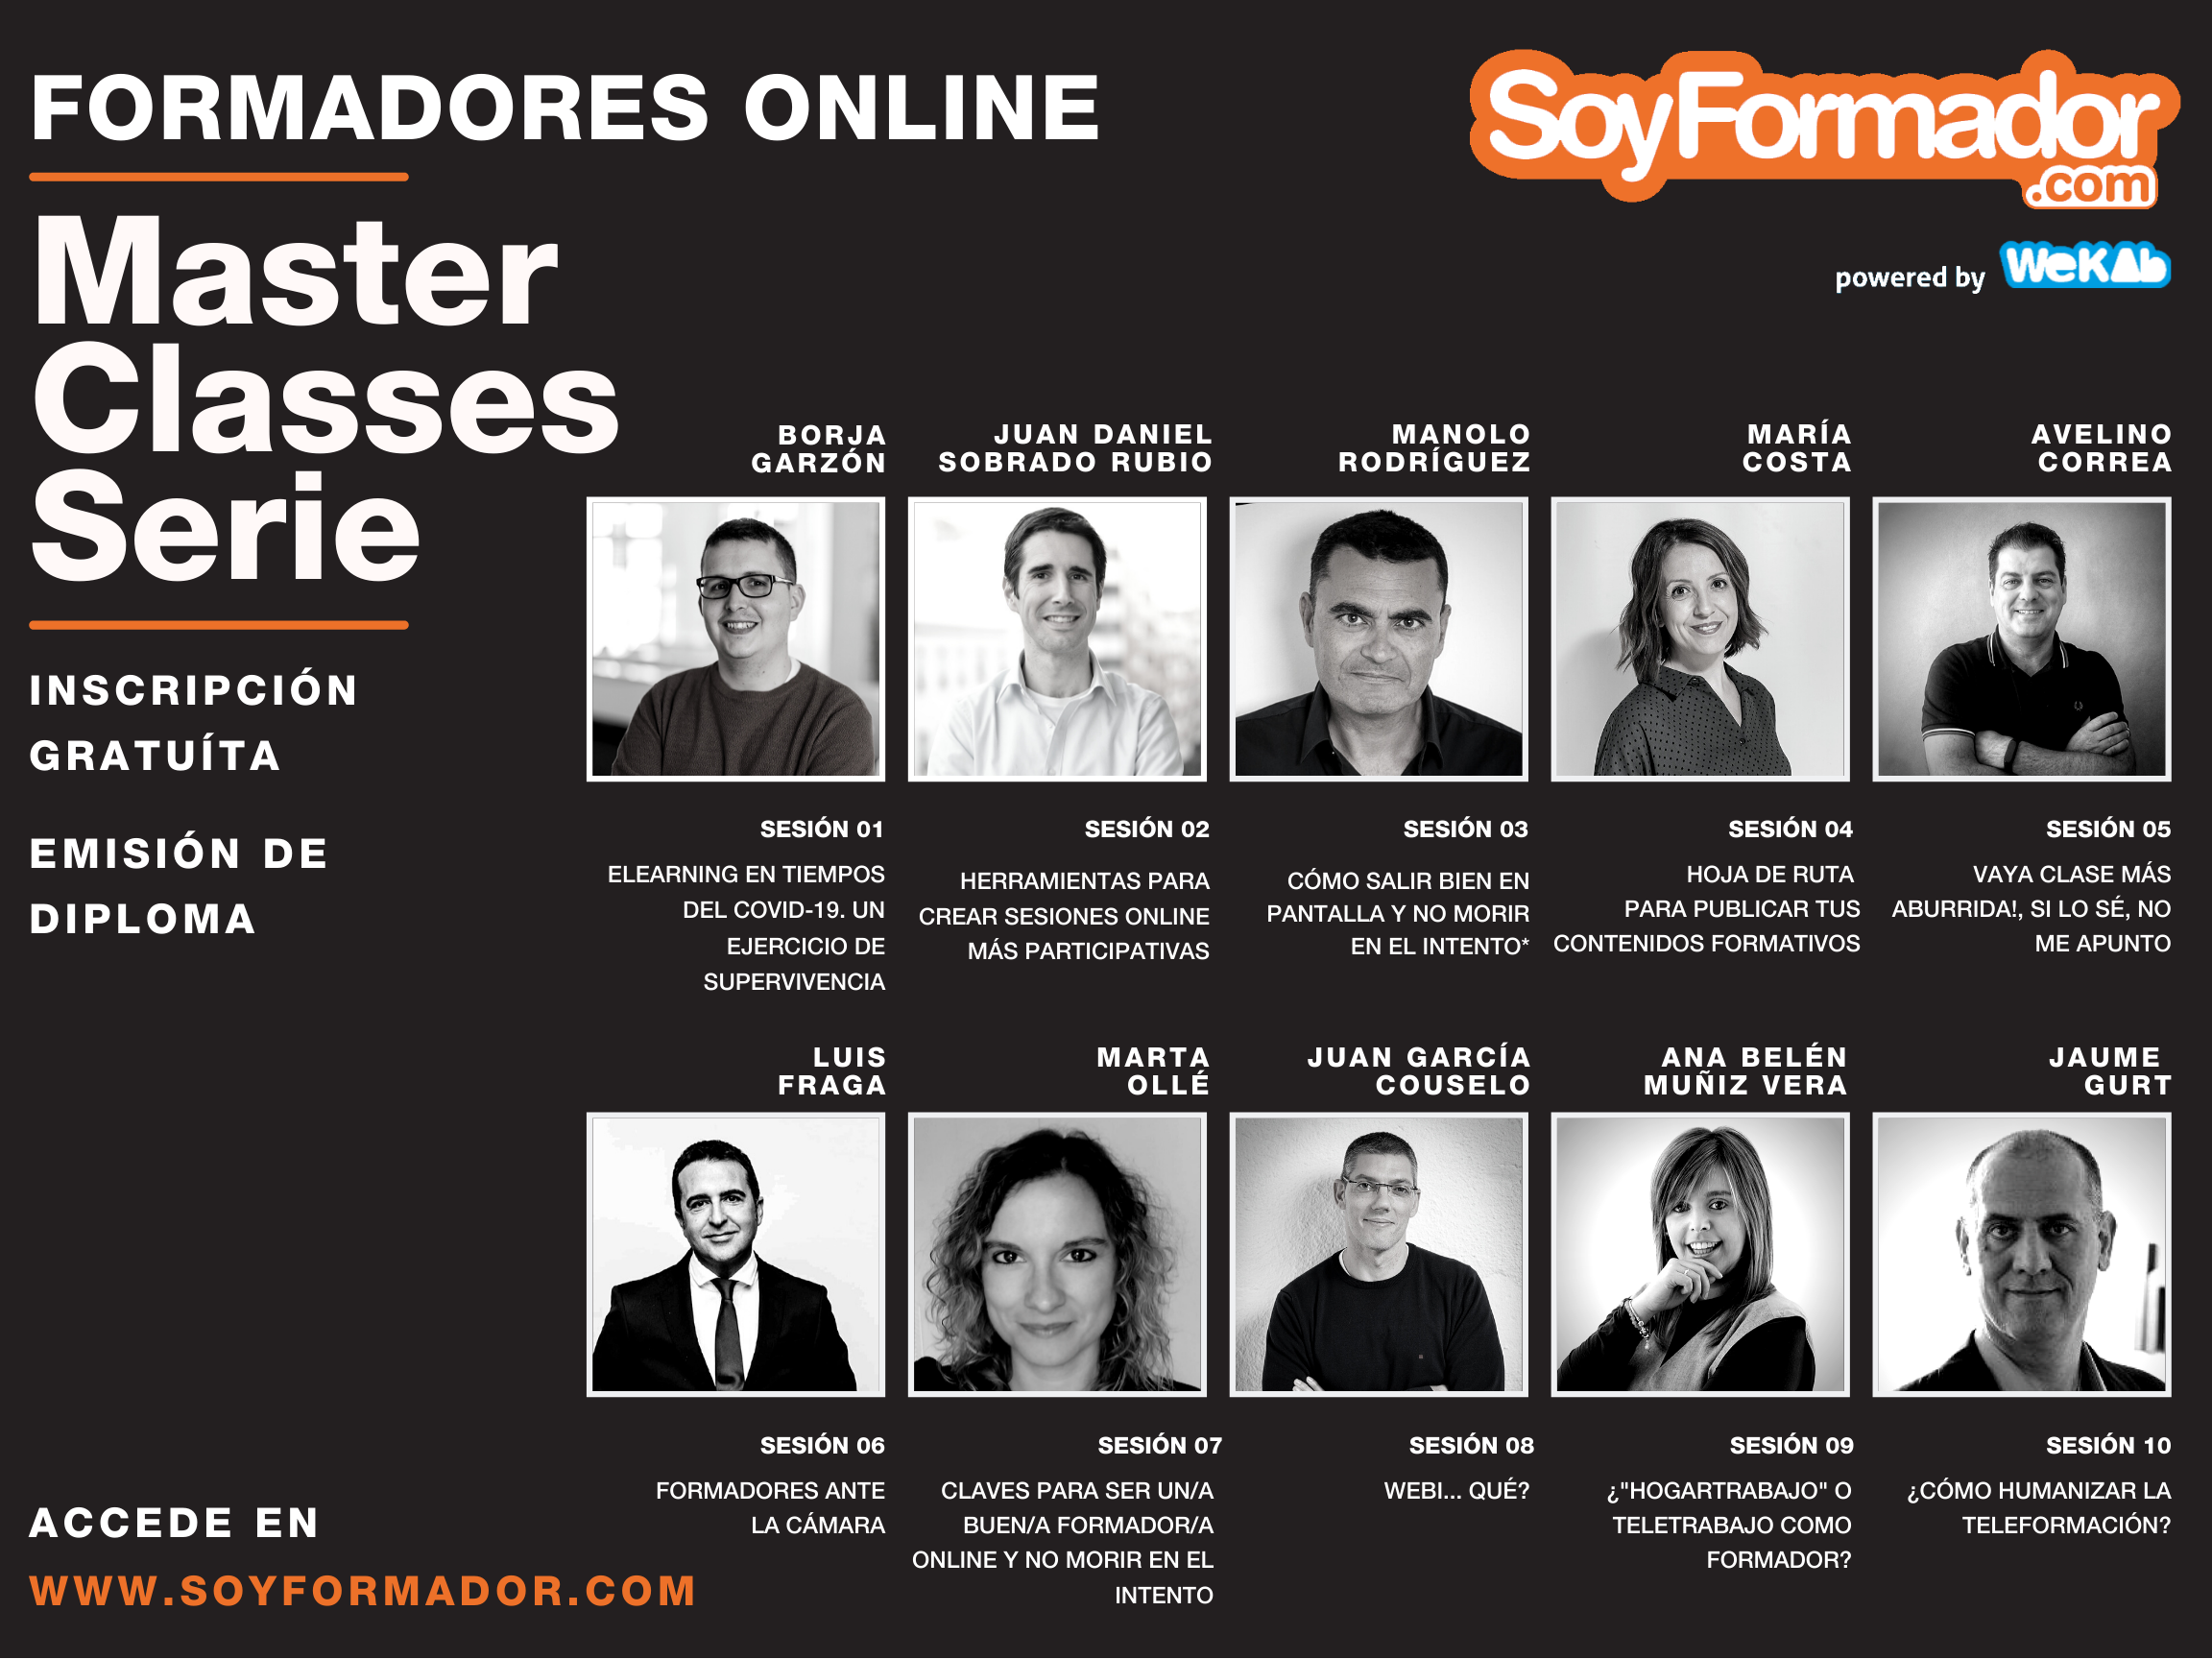 MASTERCLASS SERIE - Formadores online